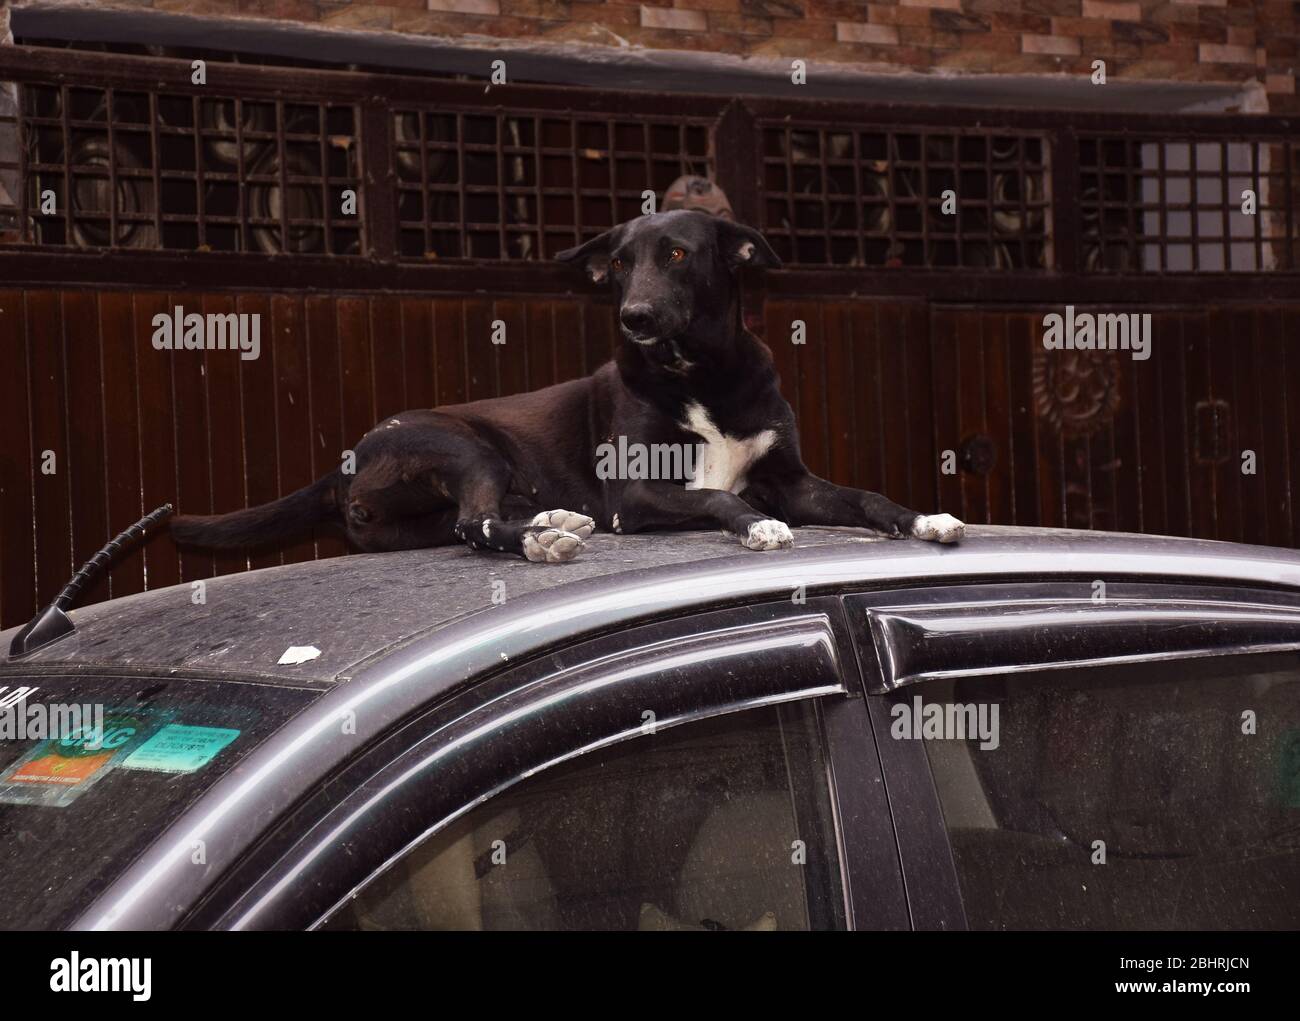 Strange, Weird and Funny Animals - Funny Indian Black Street or Stray Dog  sitting on the roof of a car Stock Photo - Alamy